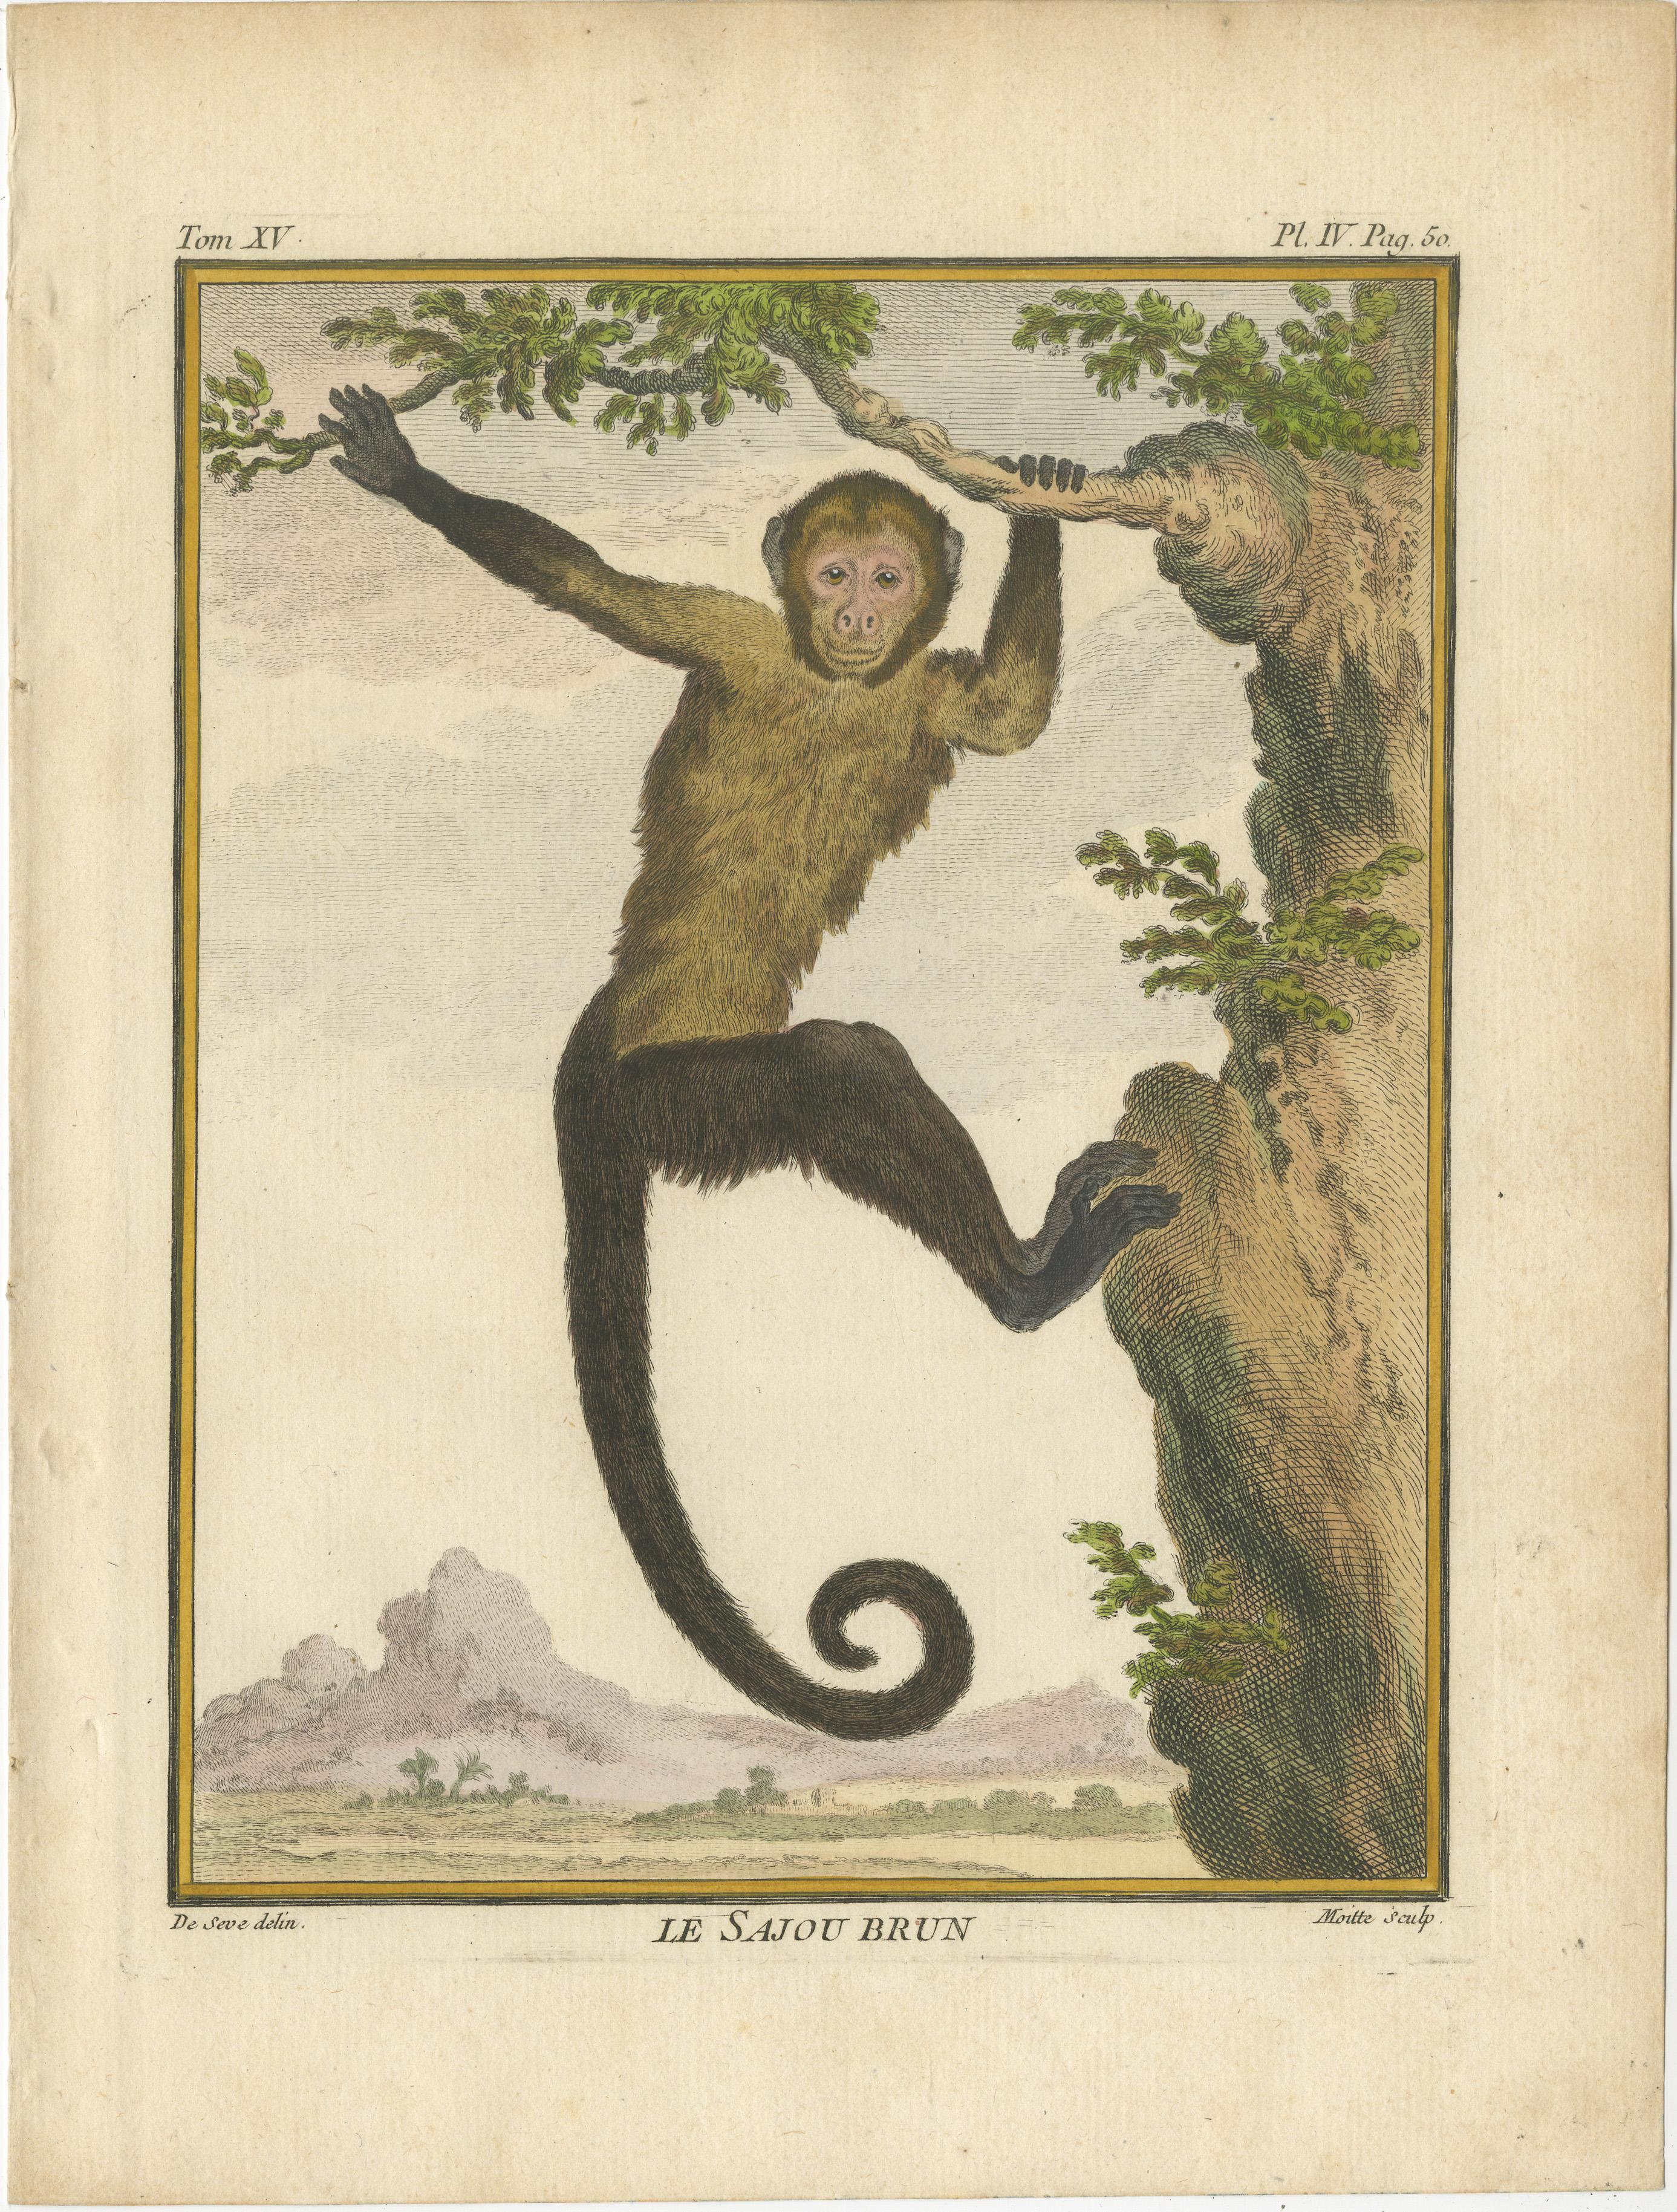 Set of 3 antique monkey prints titled 'Le Sajou Cornu', Le Coaita' and 'Le Sajou Brun'. Original old prints of a tufted capuchin, spider monkey and a brown capuchin. Published circa 1800 by or after Buffon.